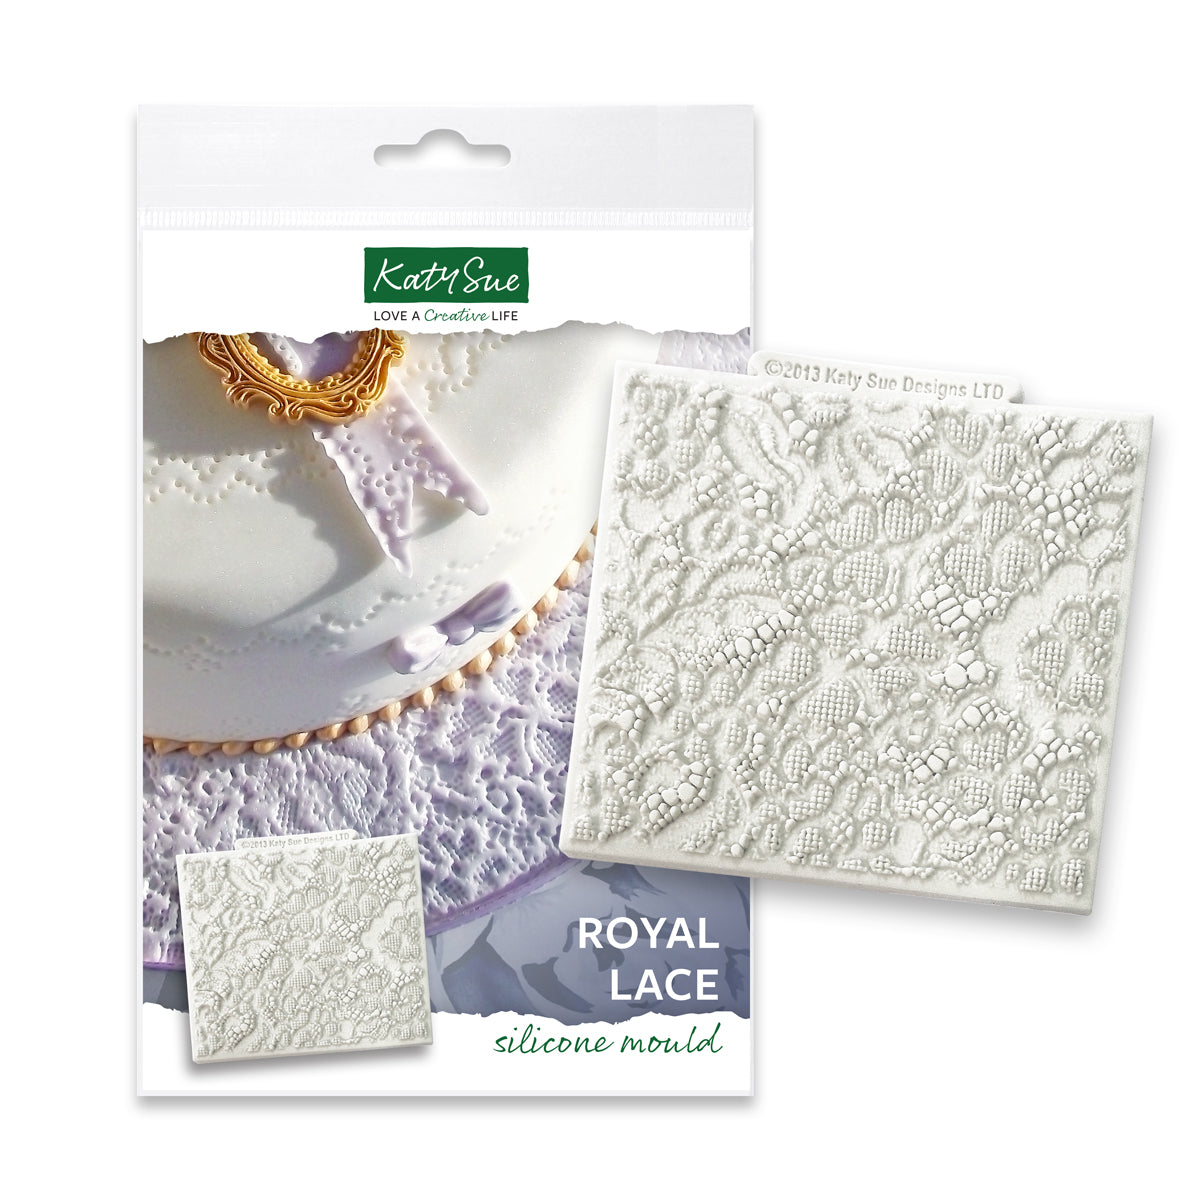 Royal Lace Silicone Mould